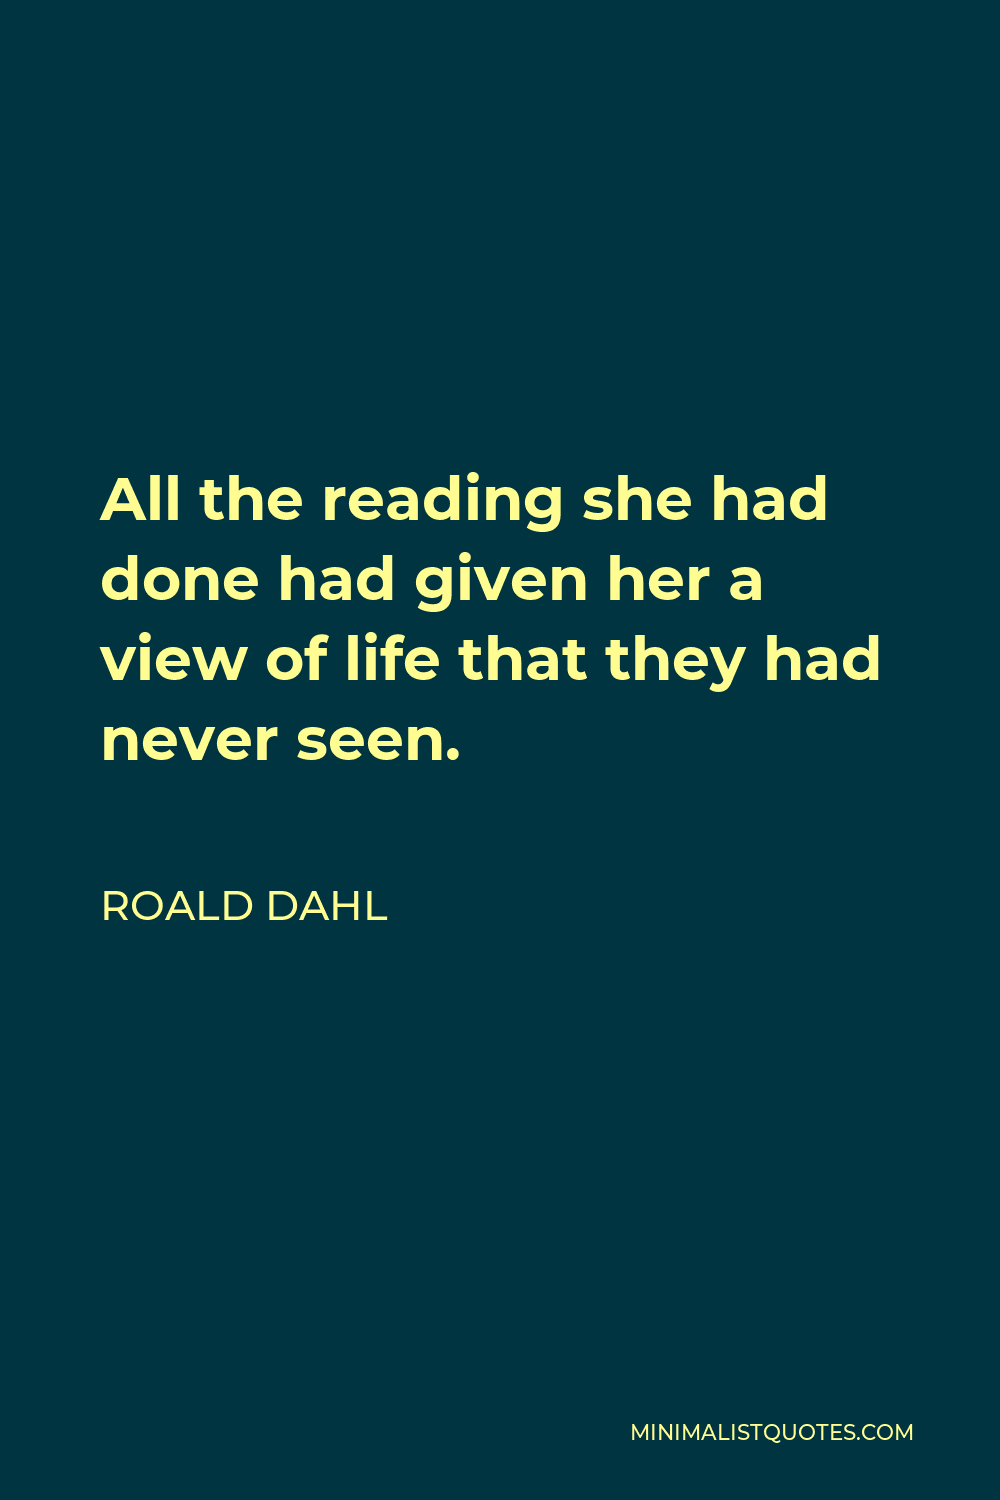 Roald Dahl Quote - All the reading she had done had given her a view of life that they had never seen.